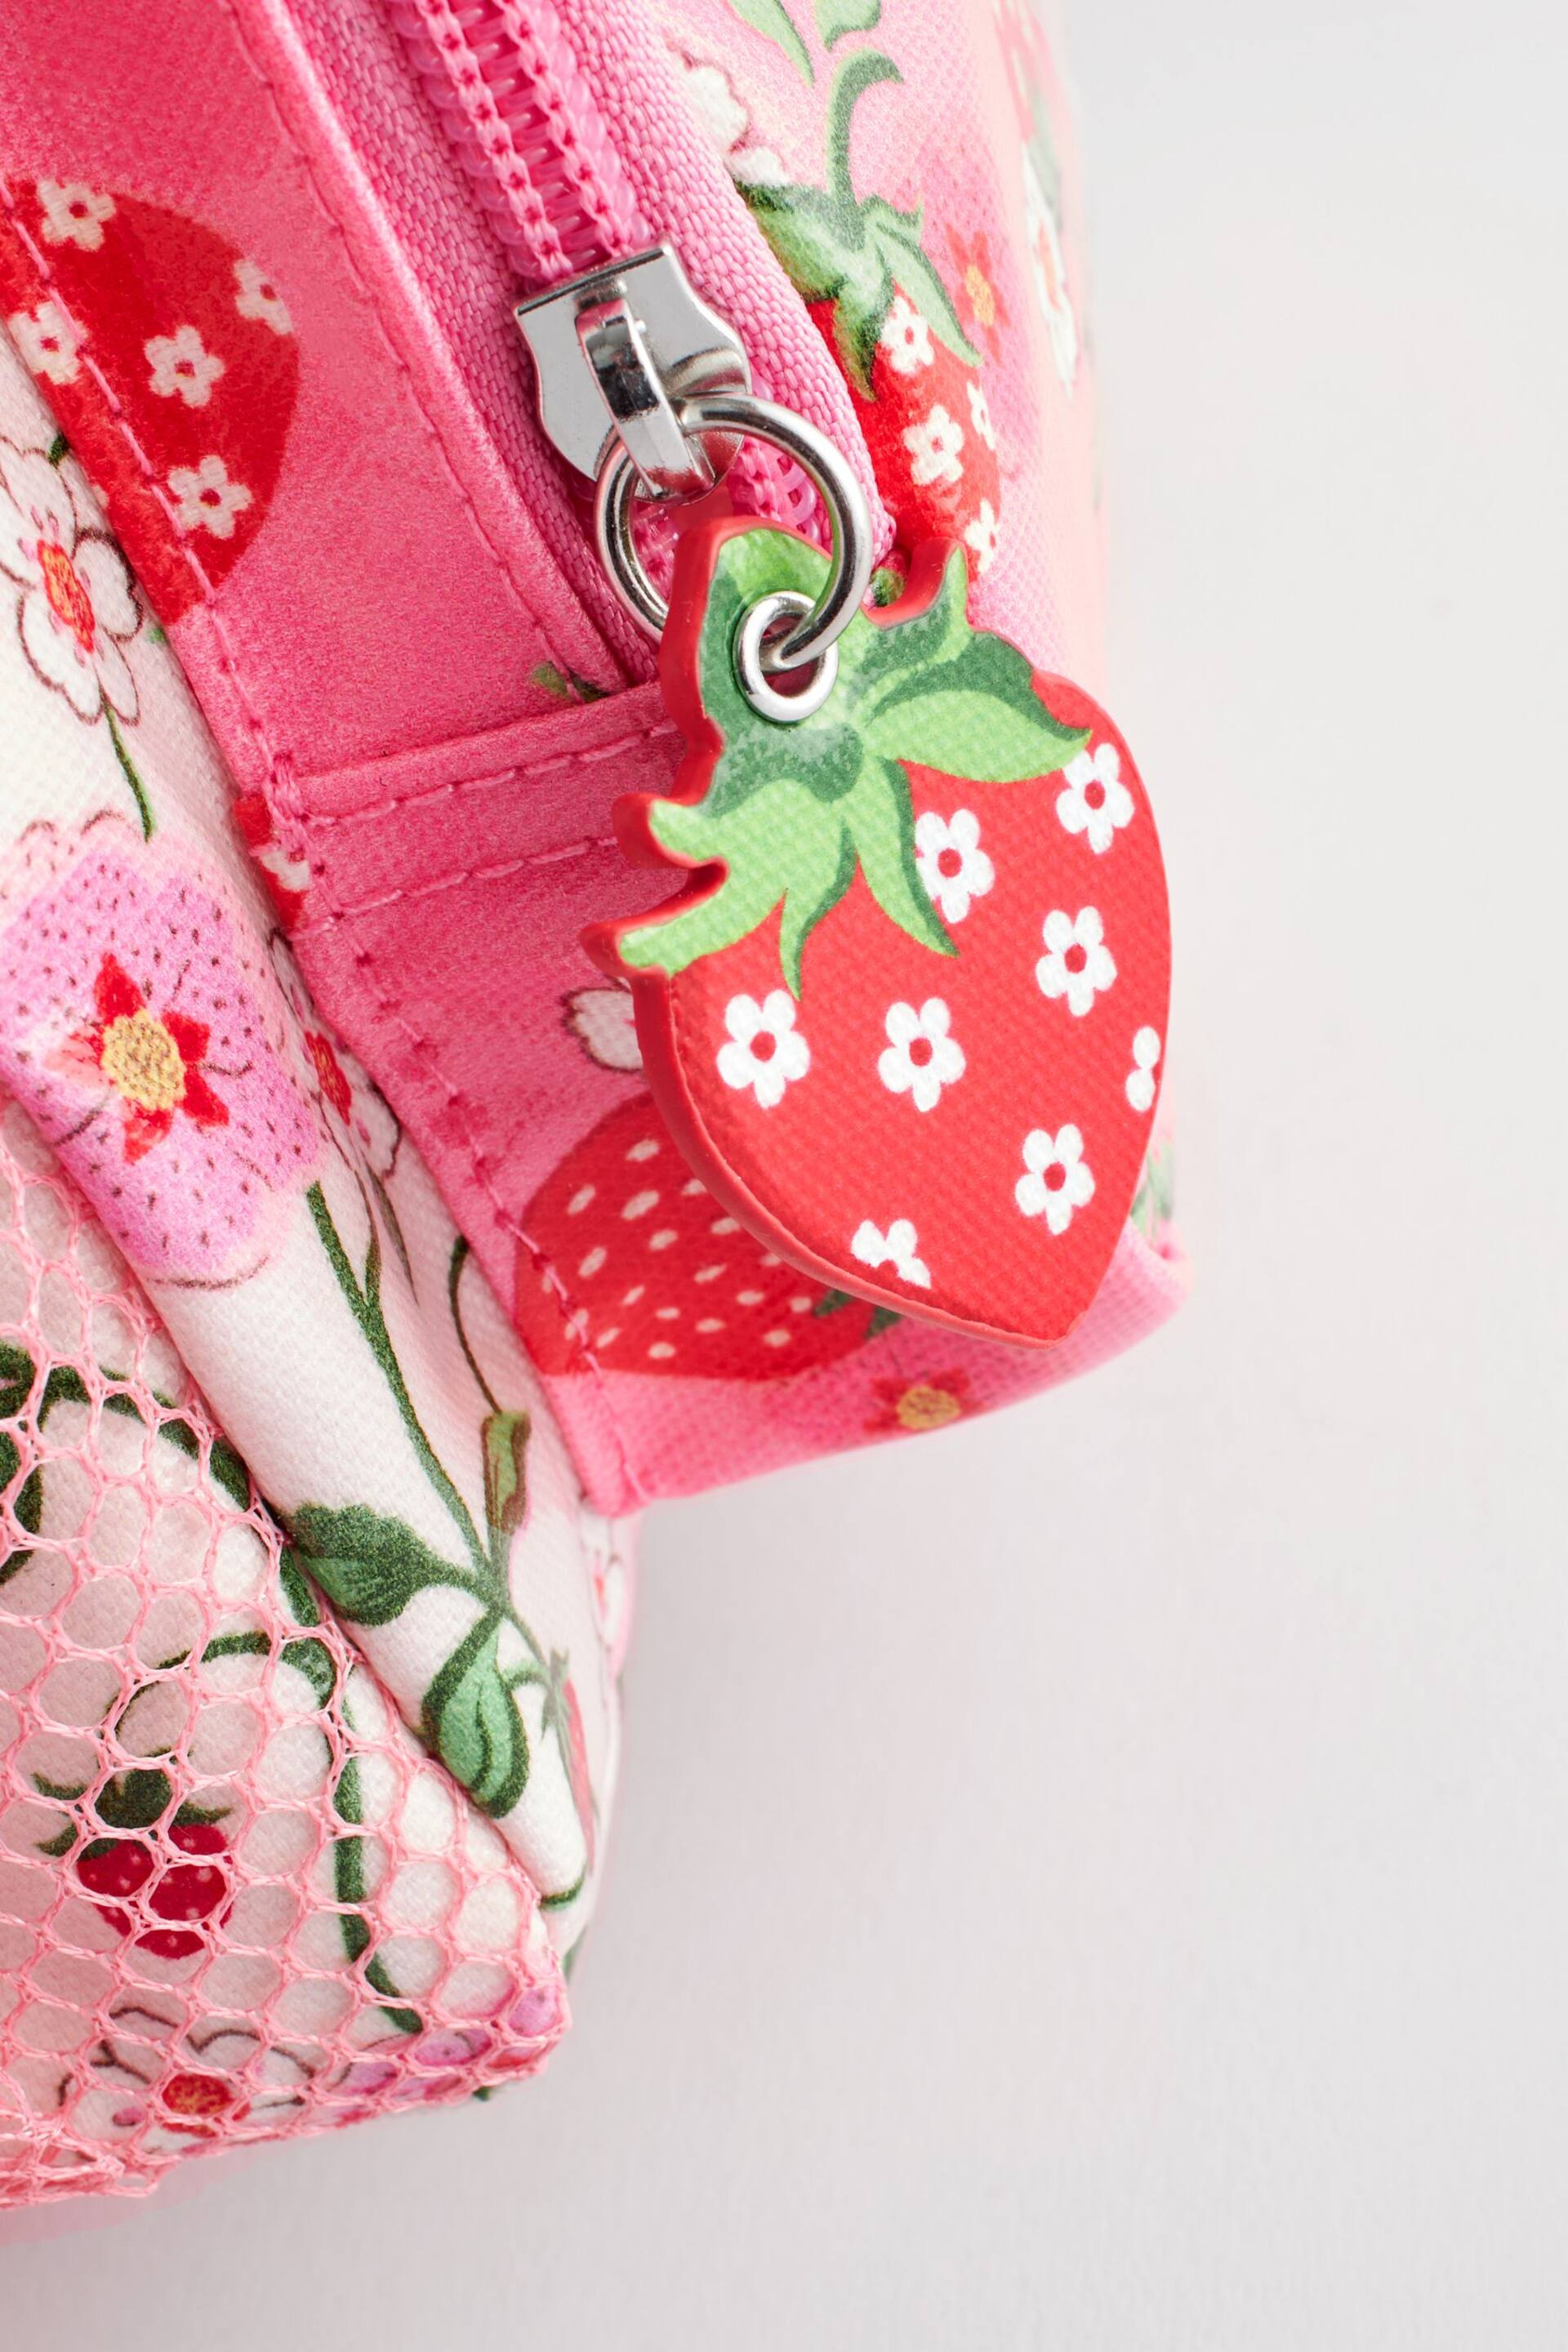 Cath Kidston Pink/White Floral Large Backpack - Image 8 of 12